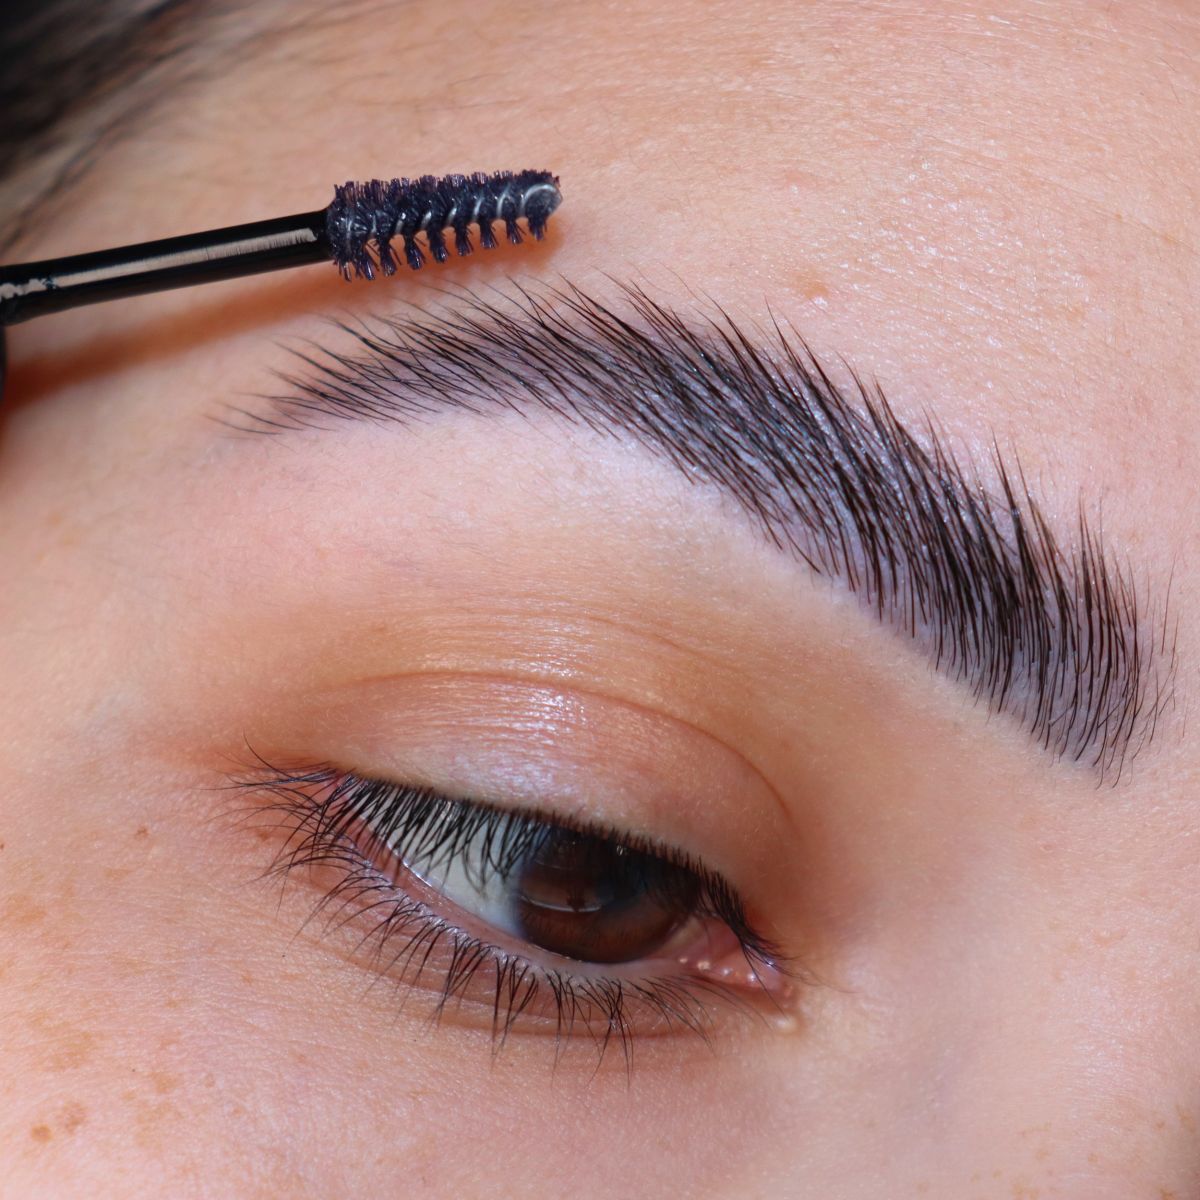 FLATTEN YOUR HAIRS WITH BROW GEL